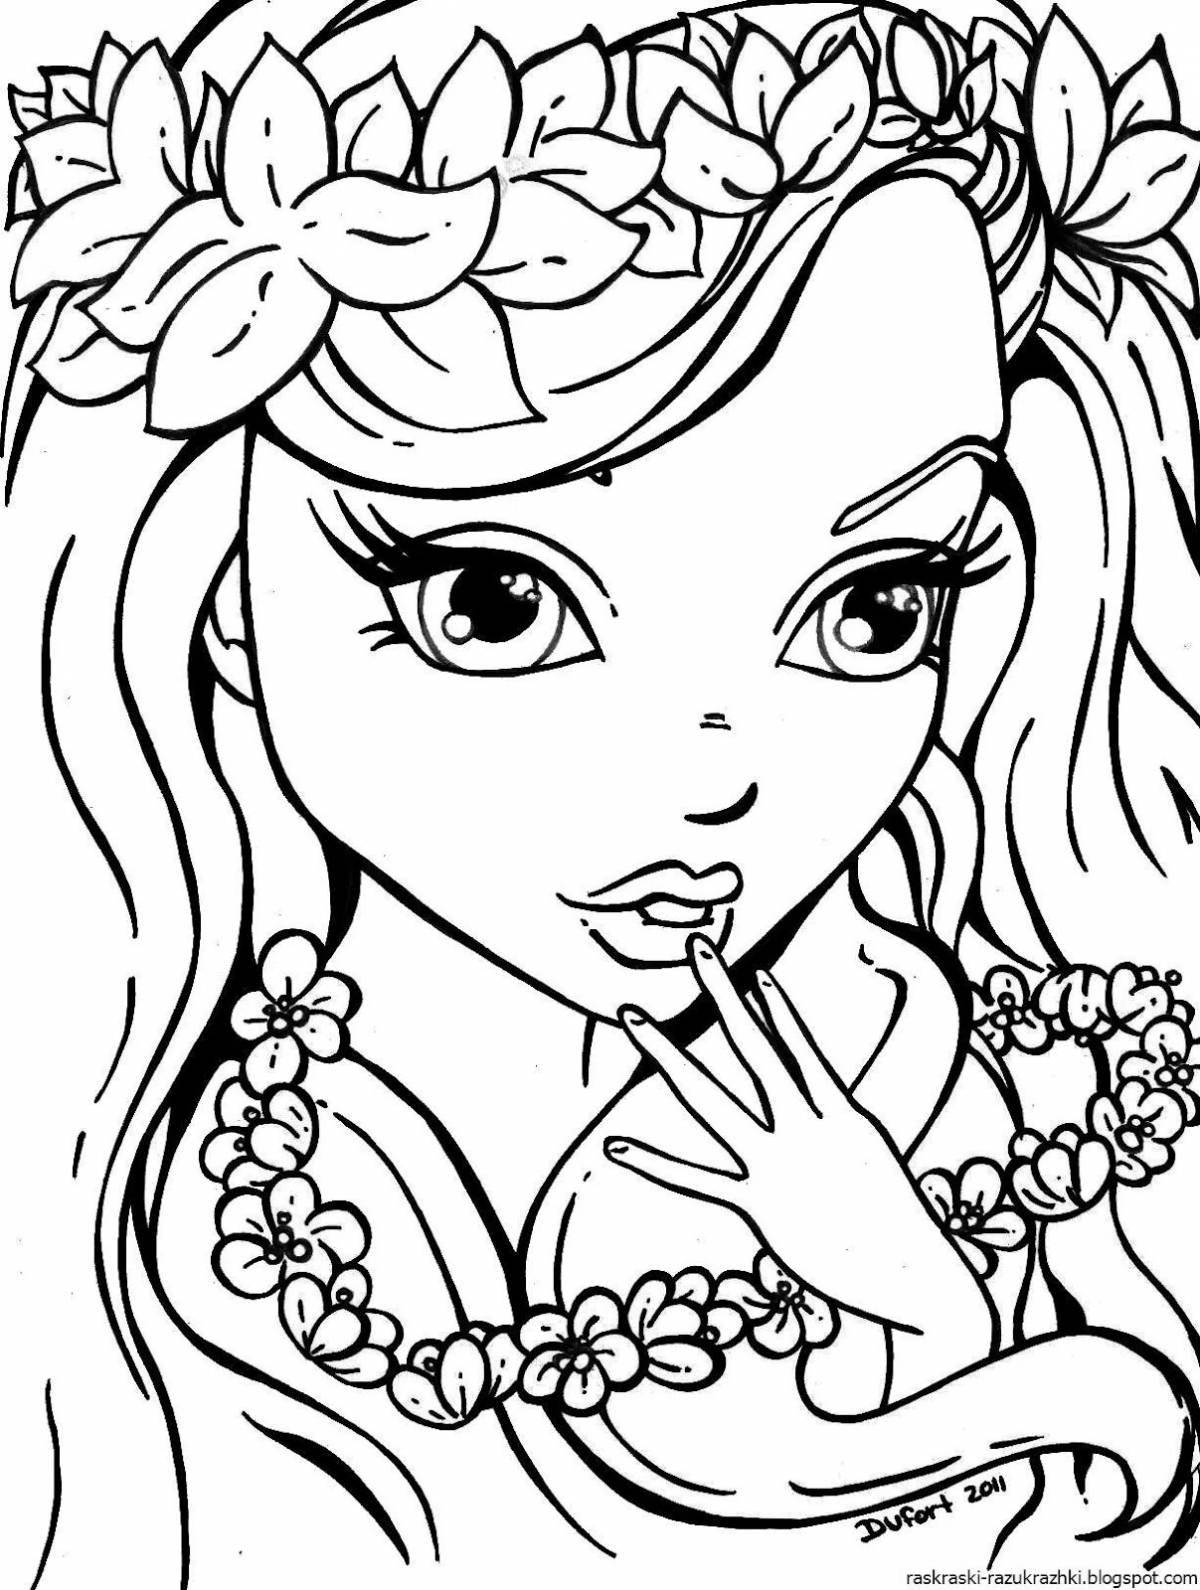 Adorable coloring pages for 12 year old girls